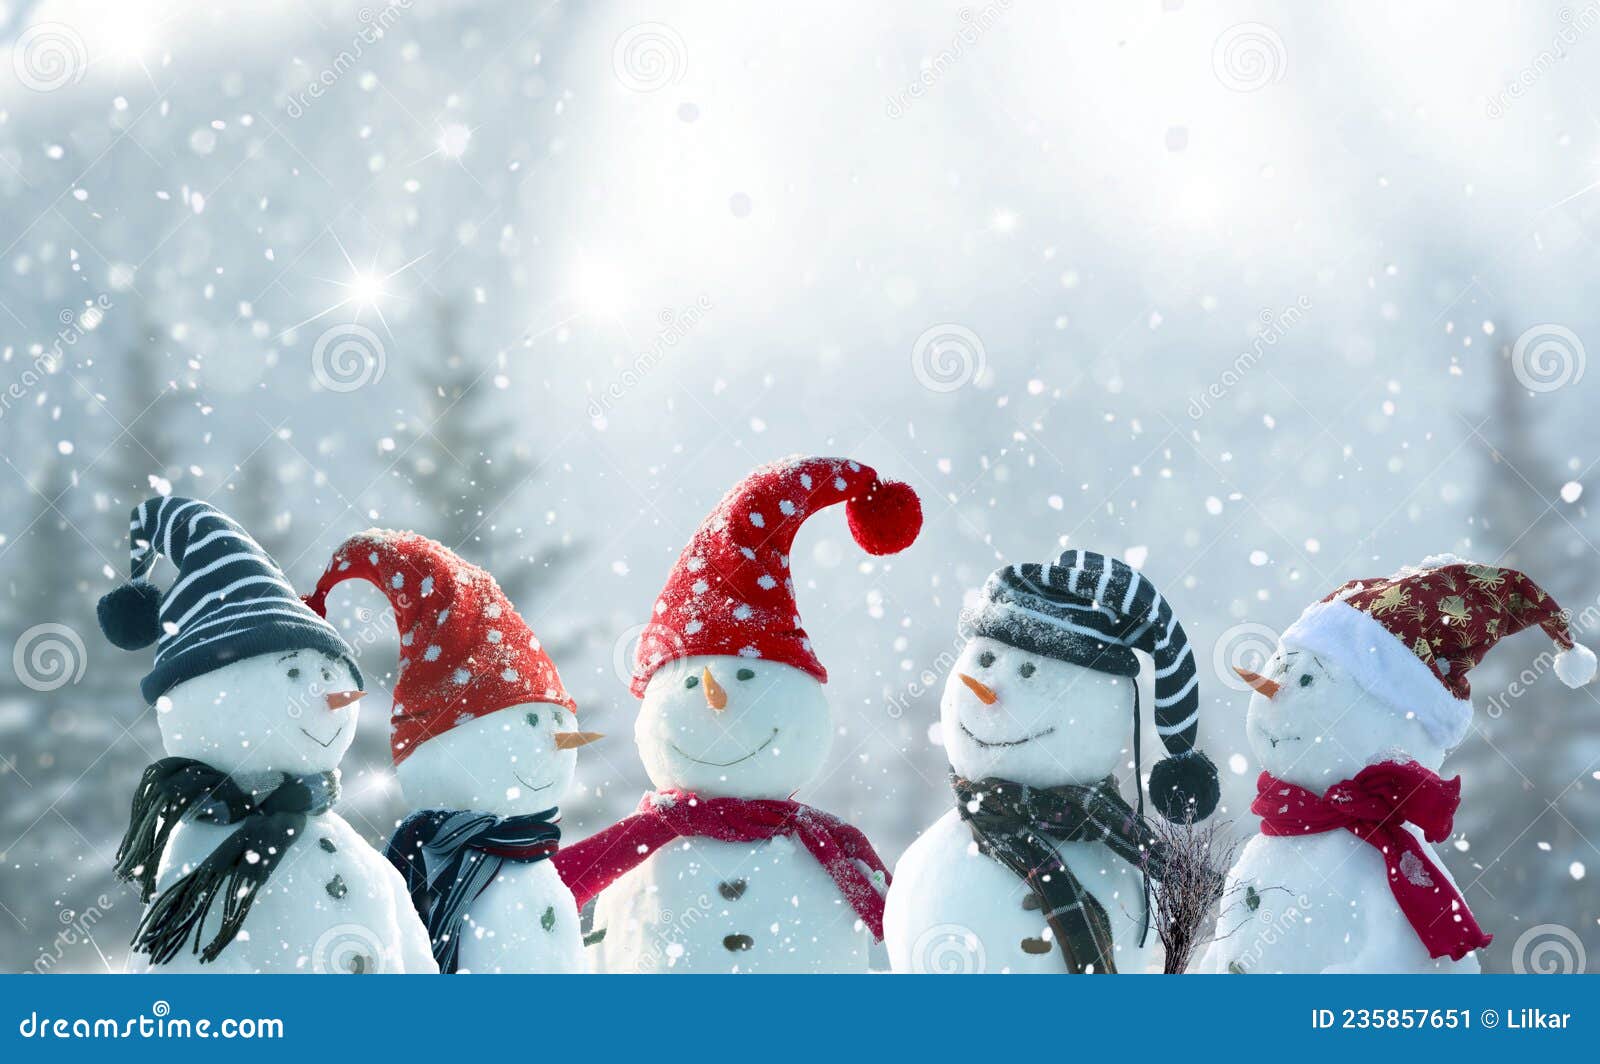 merry christmas and happy new year greeting card with copy-space.many snowmen standing in winter christmas landscape.winter